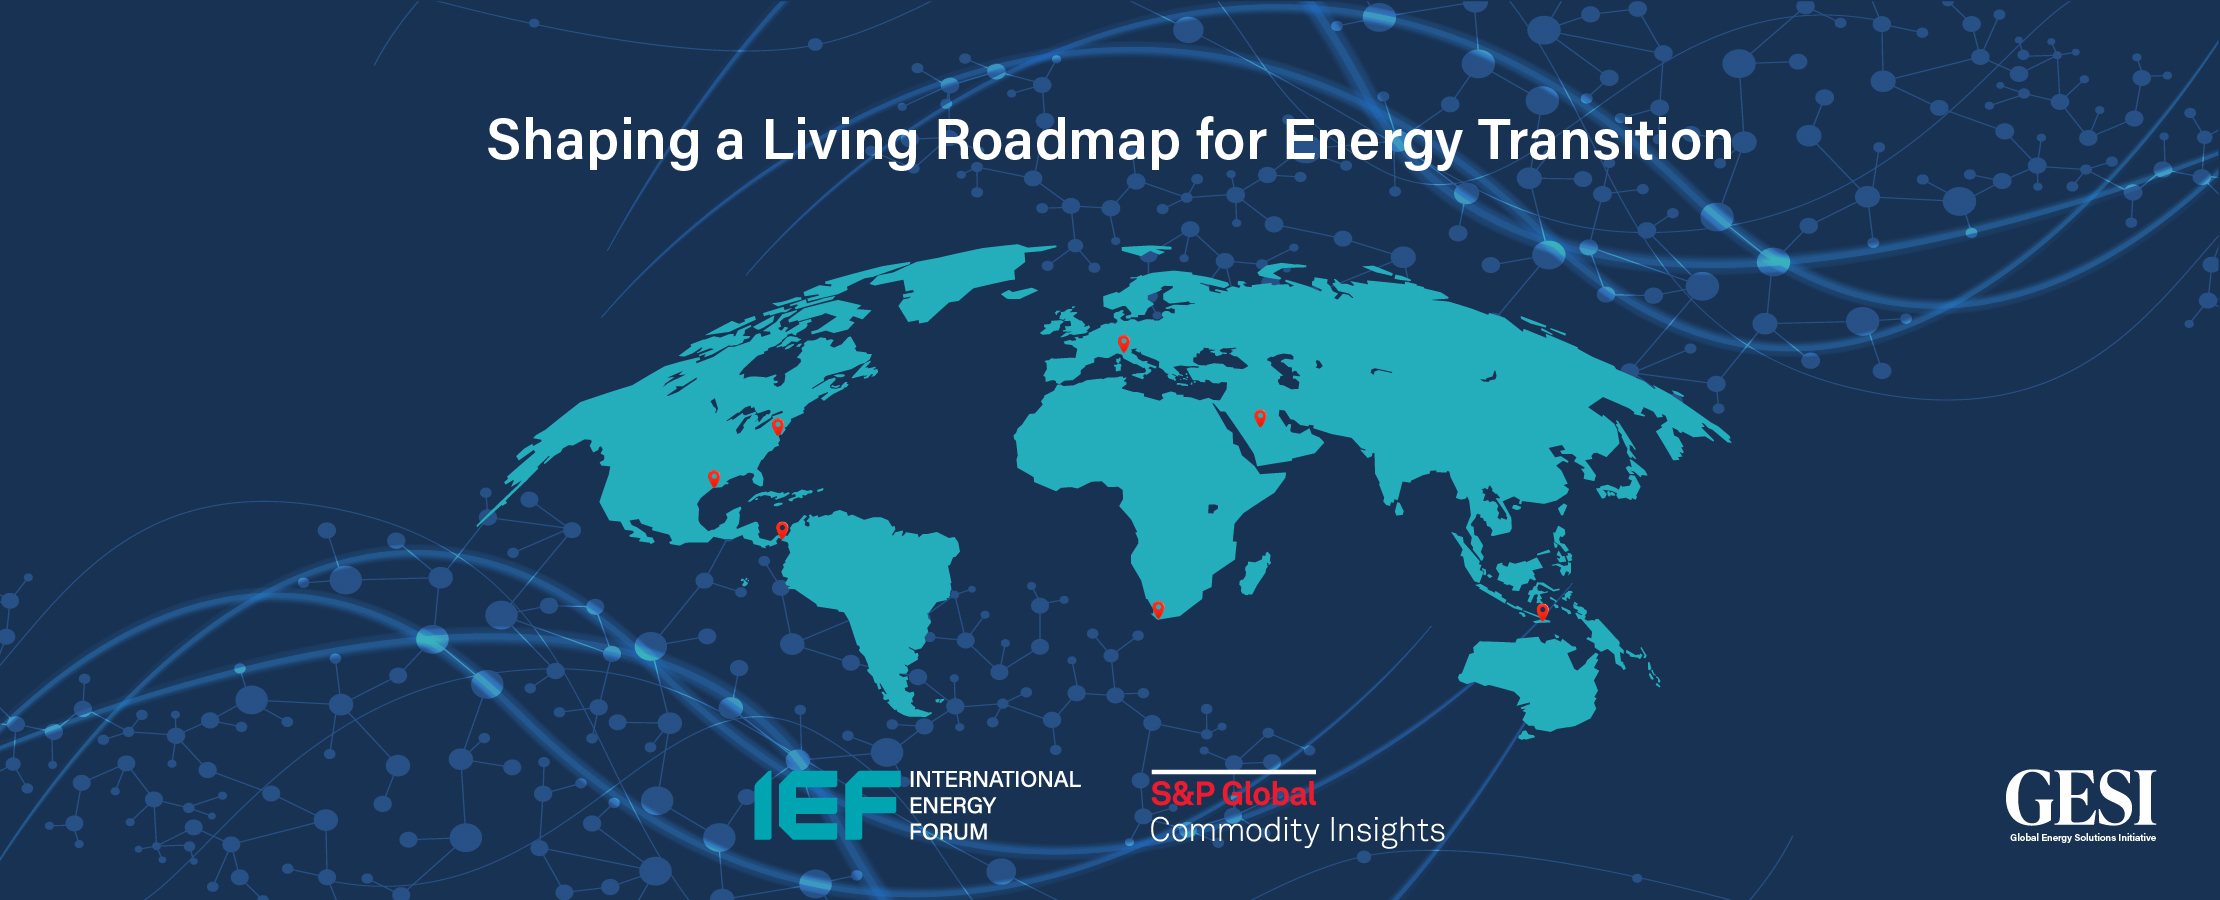 Shaping a Living Roadmap for Energy Transition